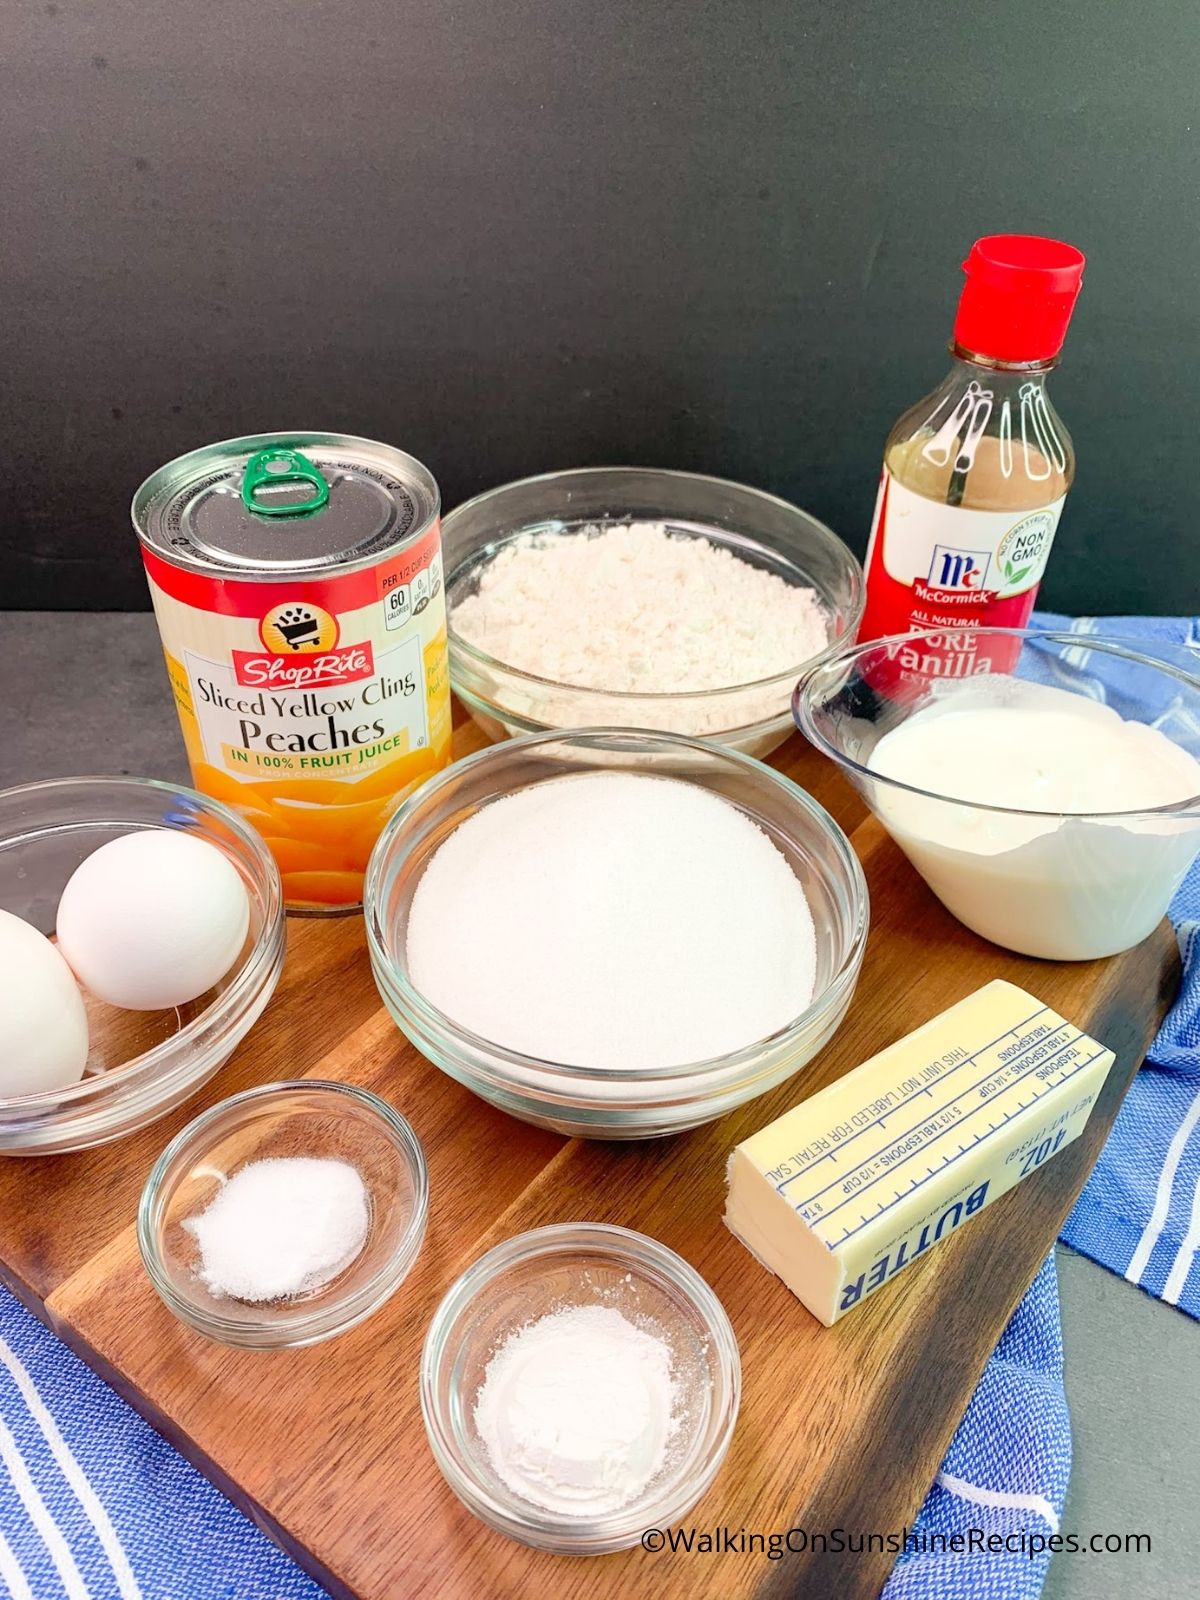 Ingredients for Peach Cake